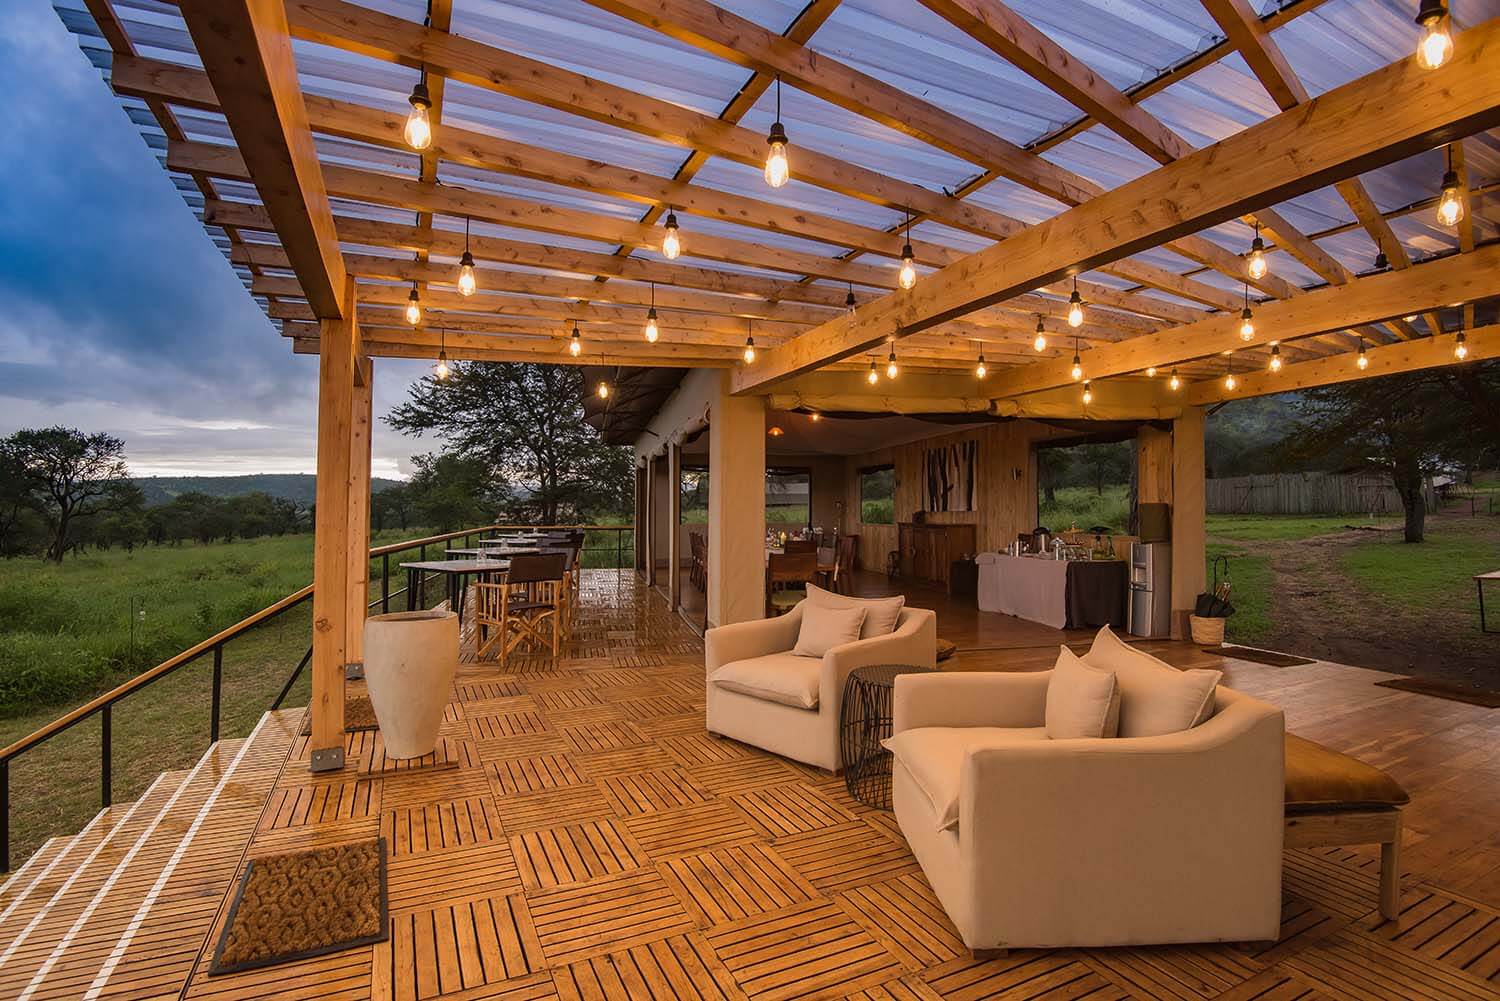 Wooden deck and with strings of bulbs hanging from the rafting with couches looking over the Serengeti